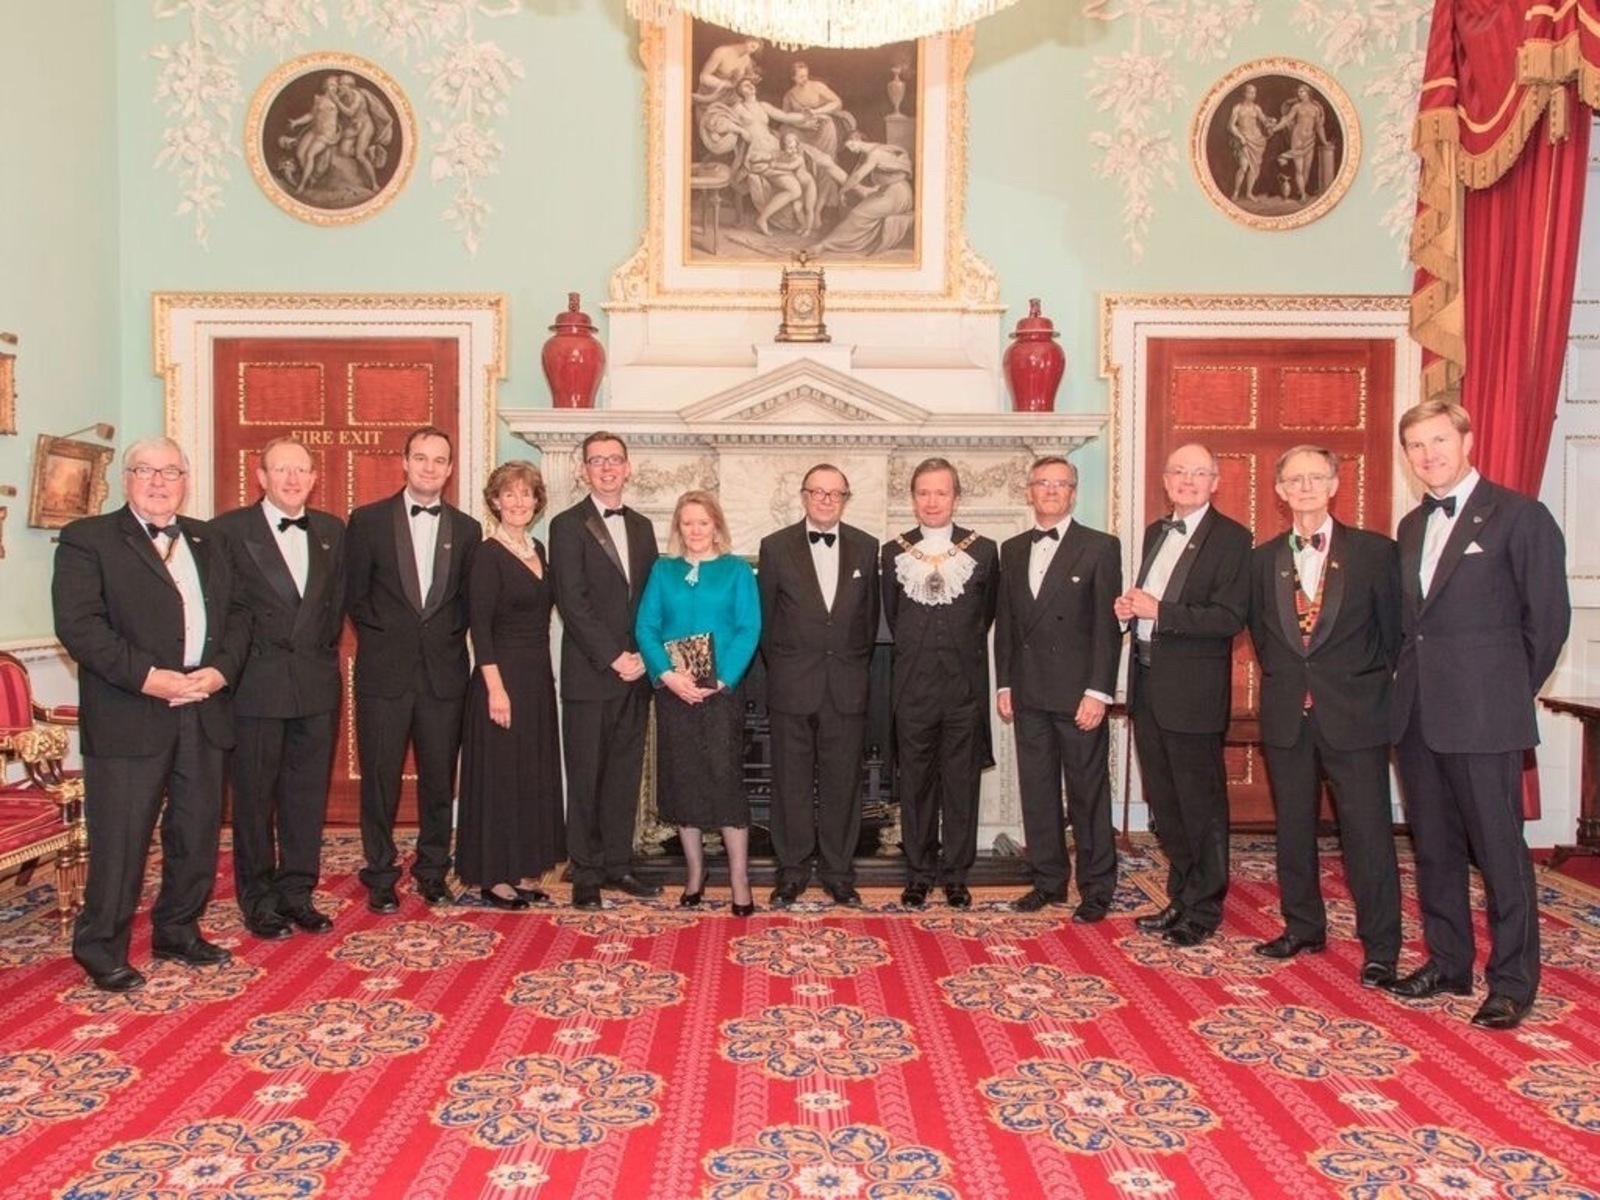 At the Mansion House with past Lord Mayor and Alderman, Lord Mountevans, with fellow trustees of the charity Mercy Ships